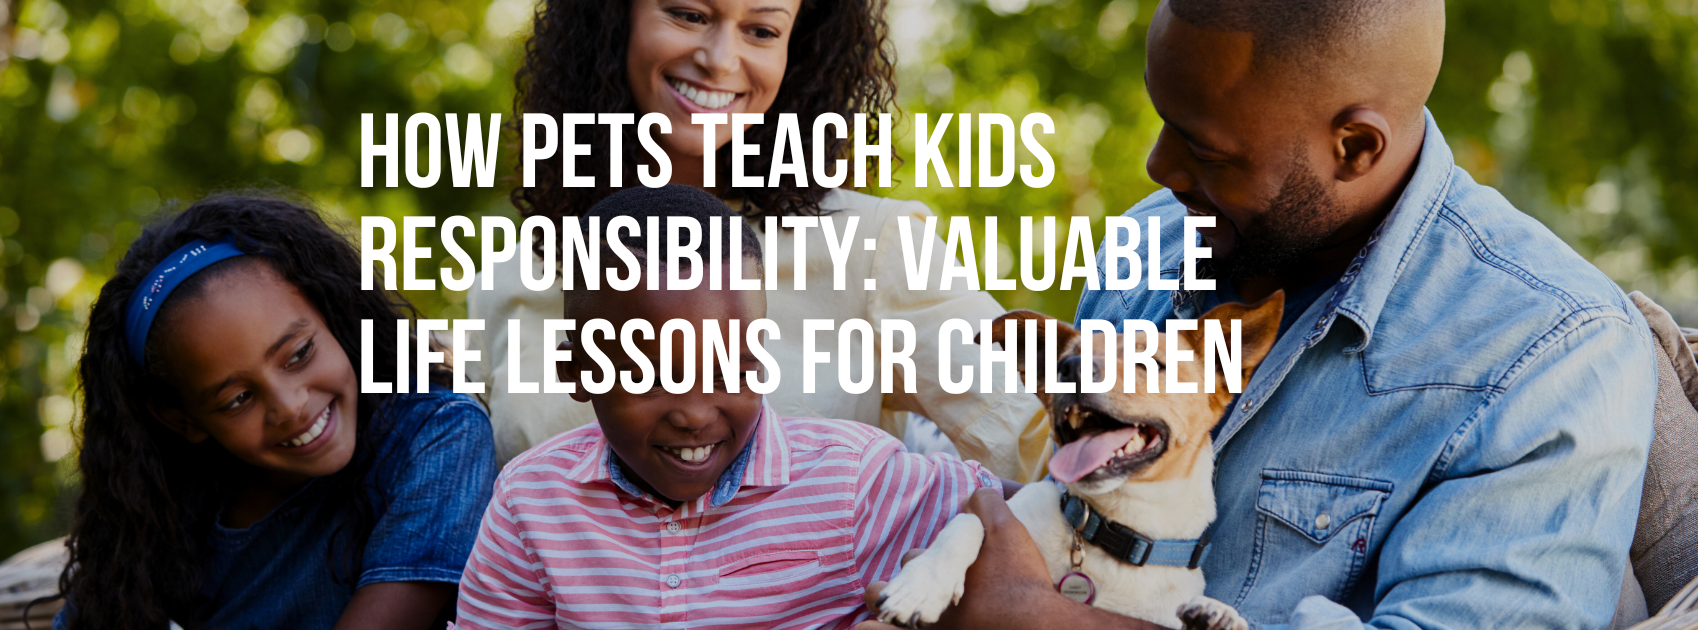 How pets teach kids responsibility: Valuable life lessons for Children